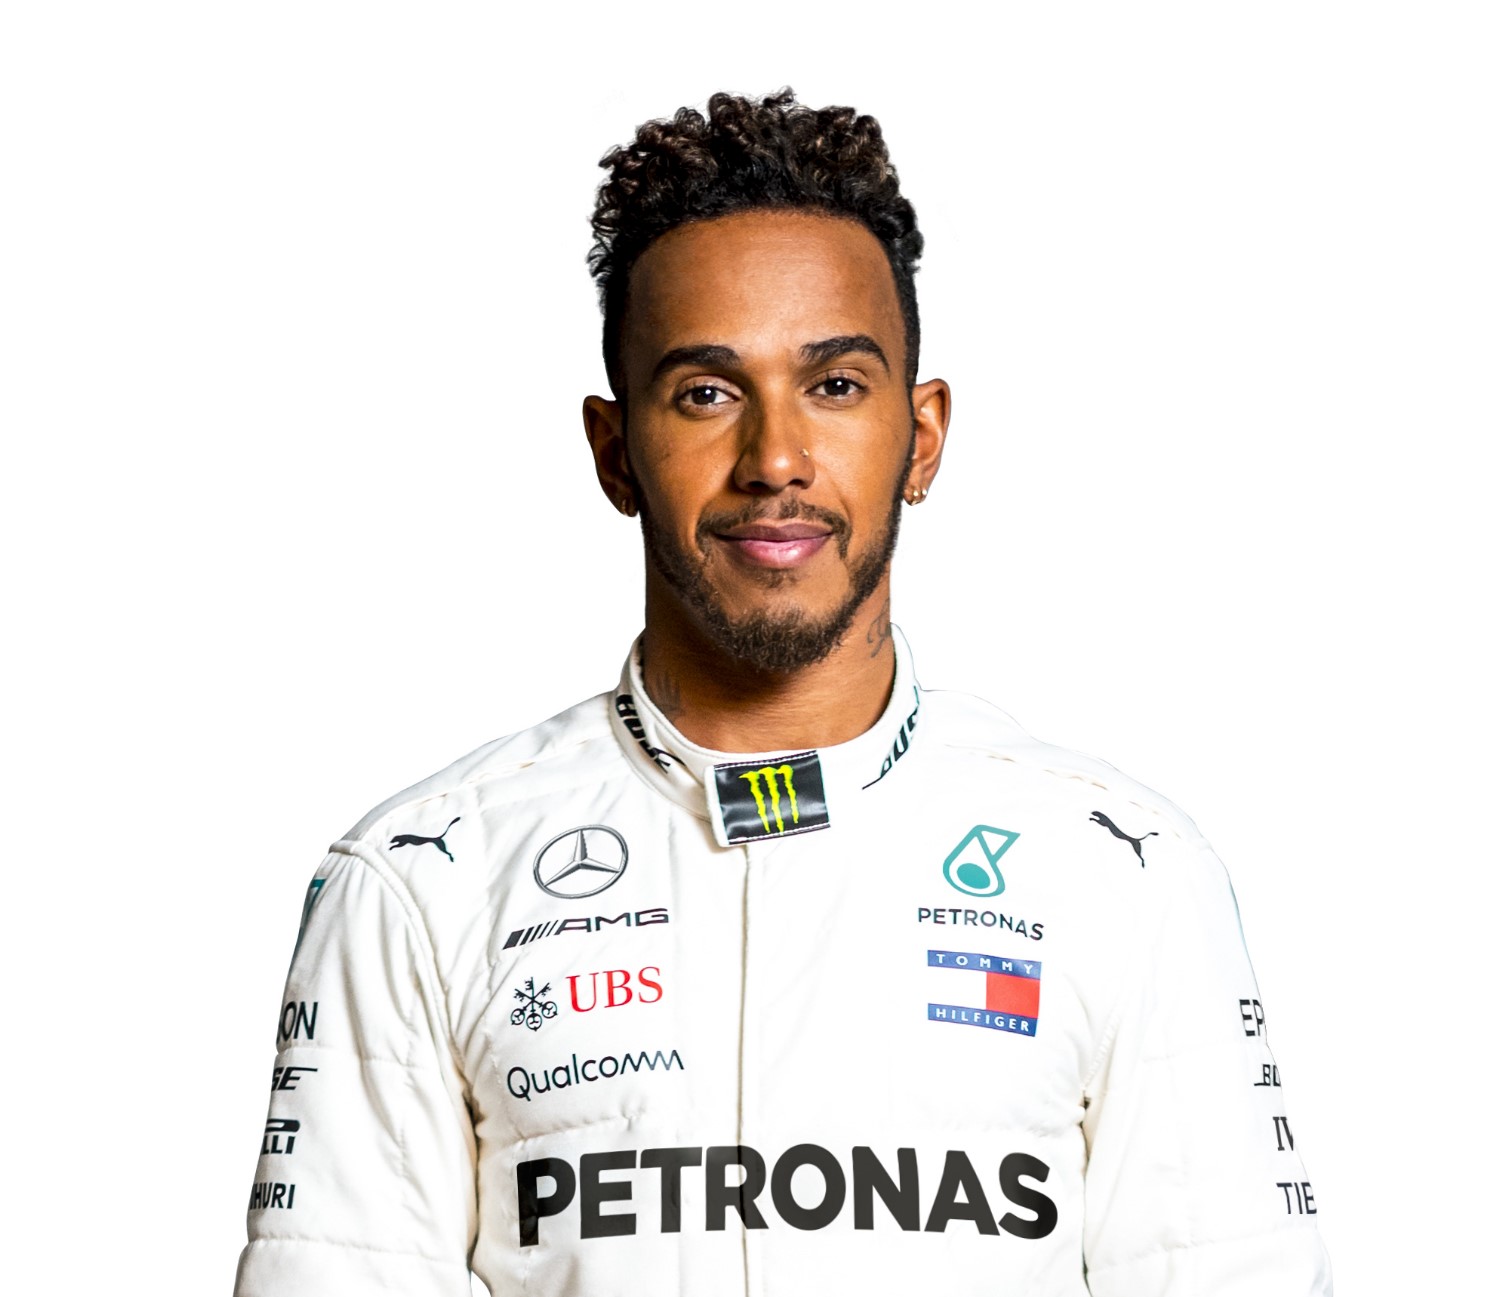 Hamilton knows he can't win if his car isn't the best